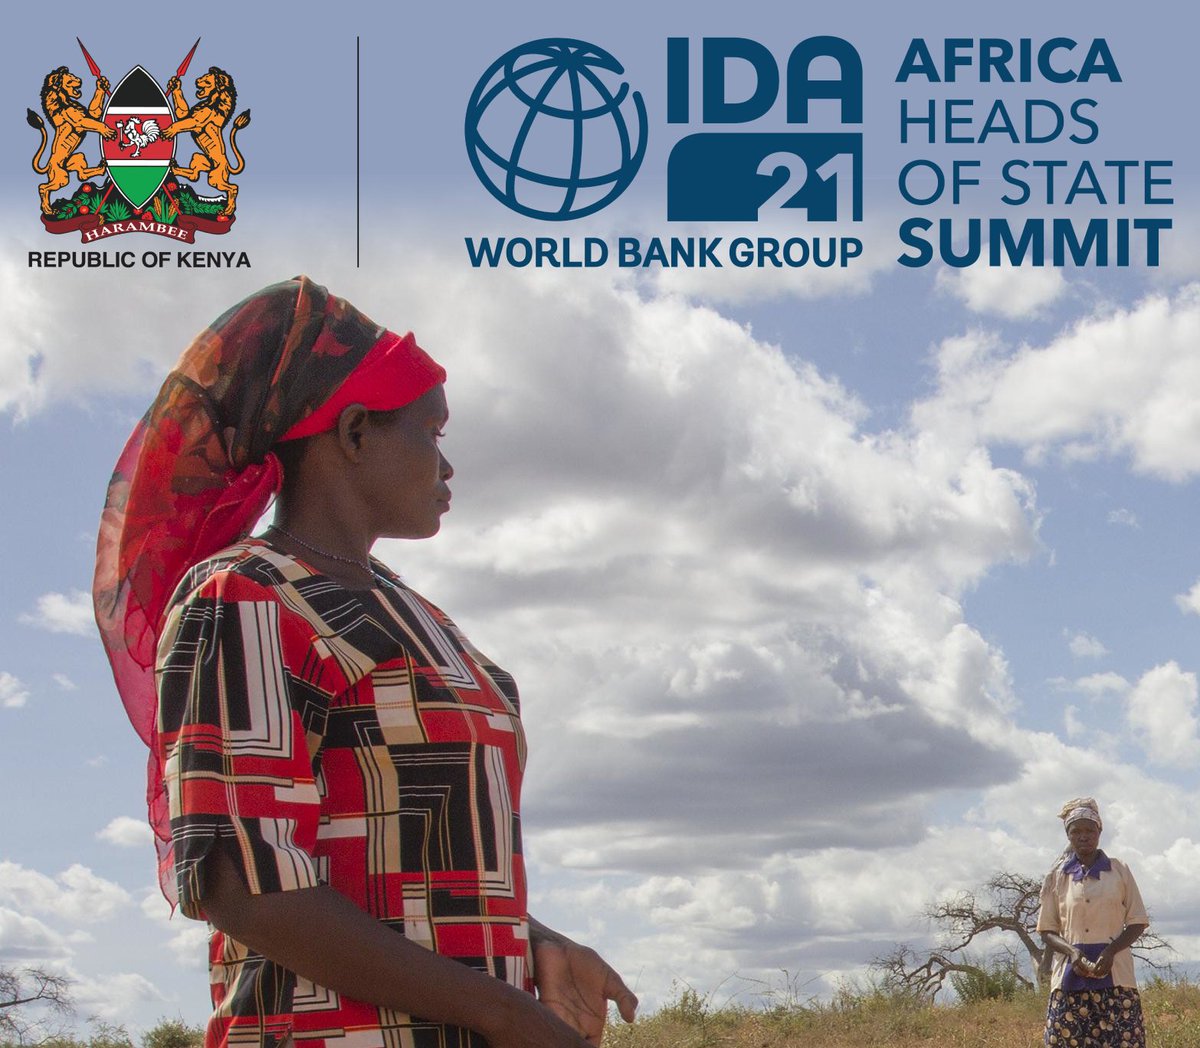 🚨Heads of State converge in #Nairobi next week for the @WBG_IDA summit. Curious about #IDA's mission? Dive into this explainer video to uncover its transformative role in delivering #GoodFood4All!👉 bit.ly/3Jslhi9 #IDAworks #IDA21 #HungryforAction